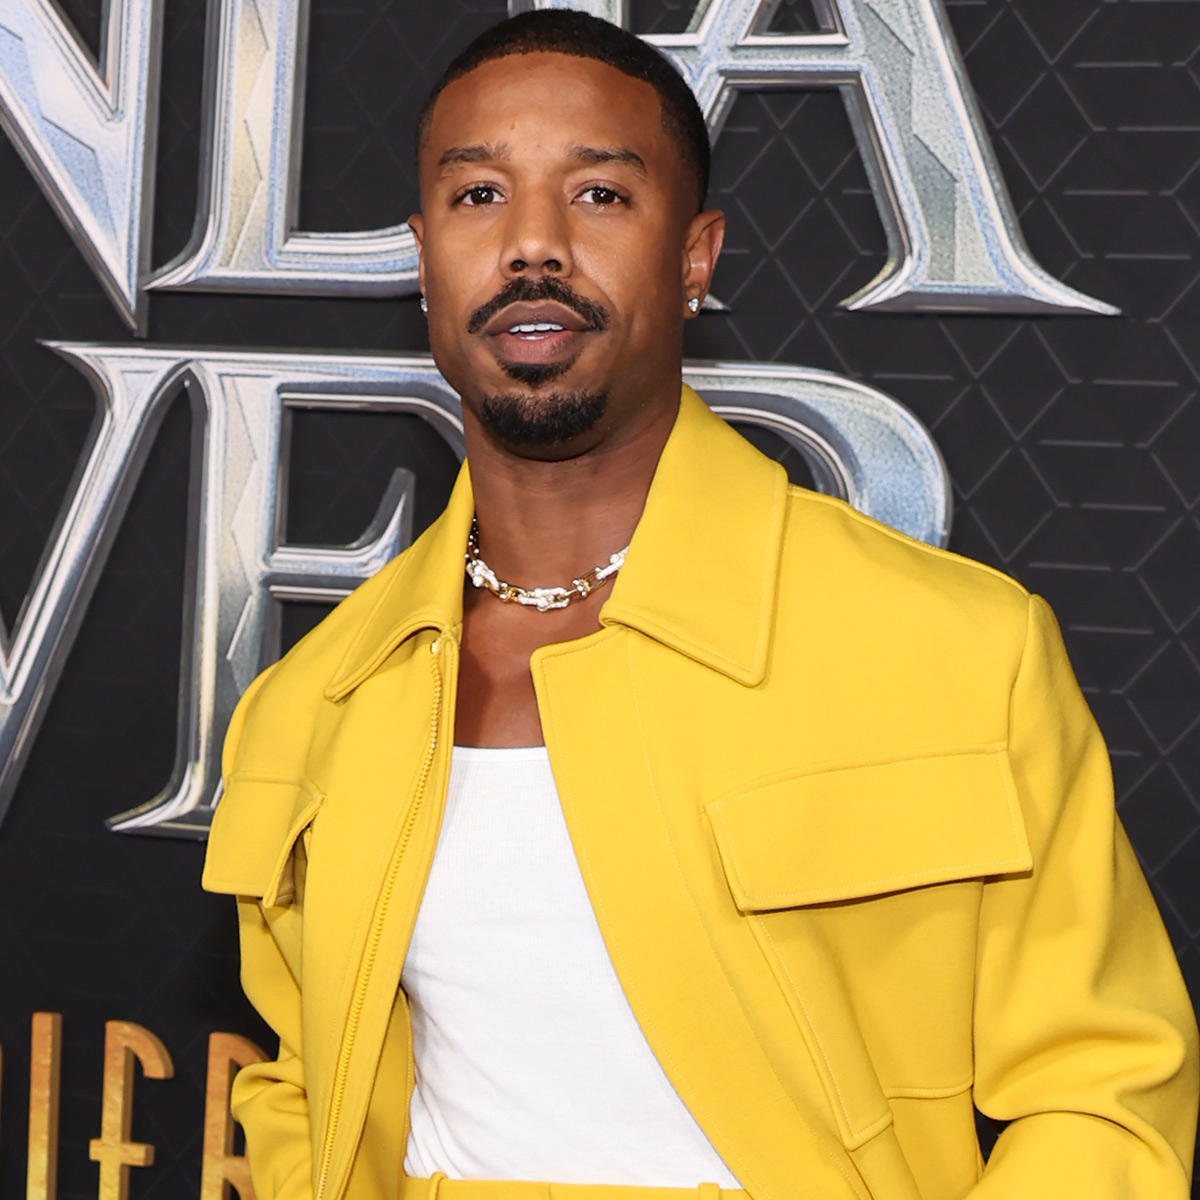 Michael B. Jordan Talks Watches, Red Carpet Prep for 'Black Panther' Tour –  The Hollywood Reporter